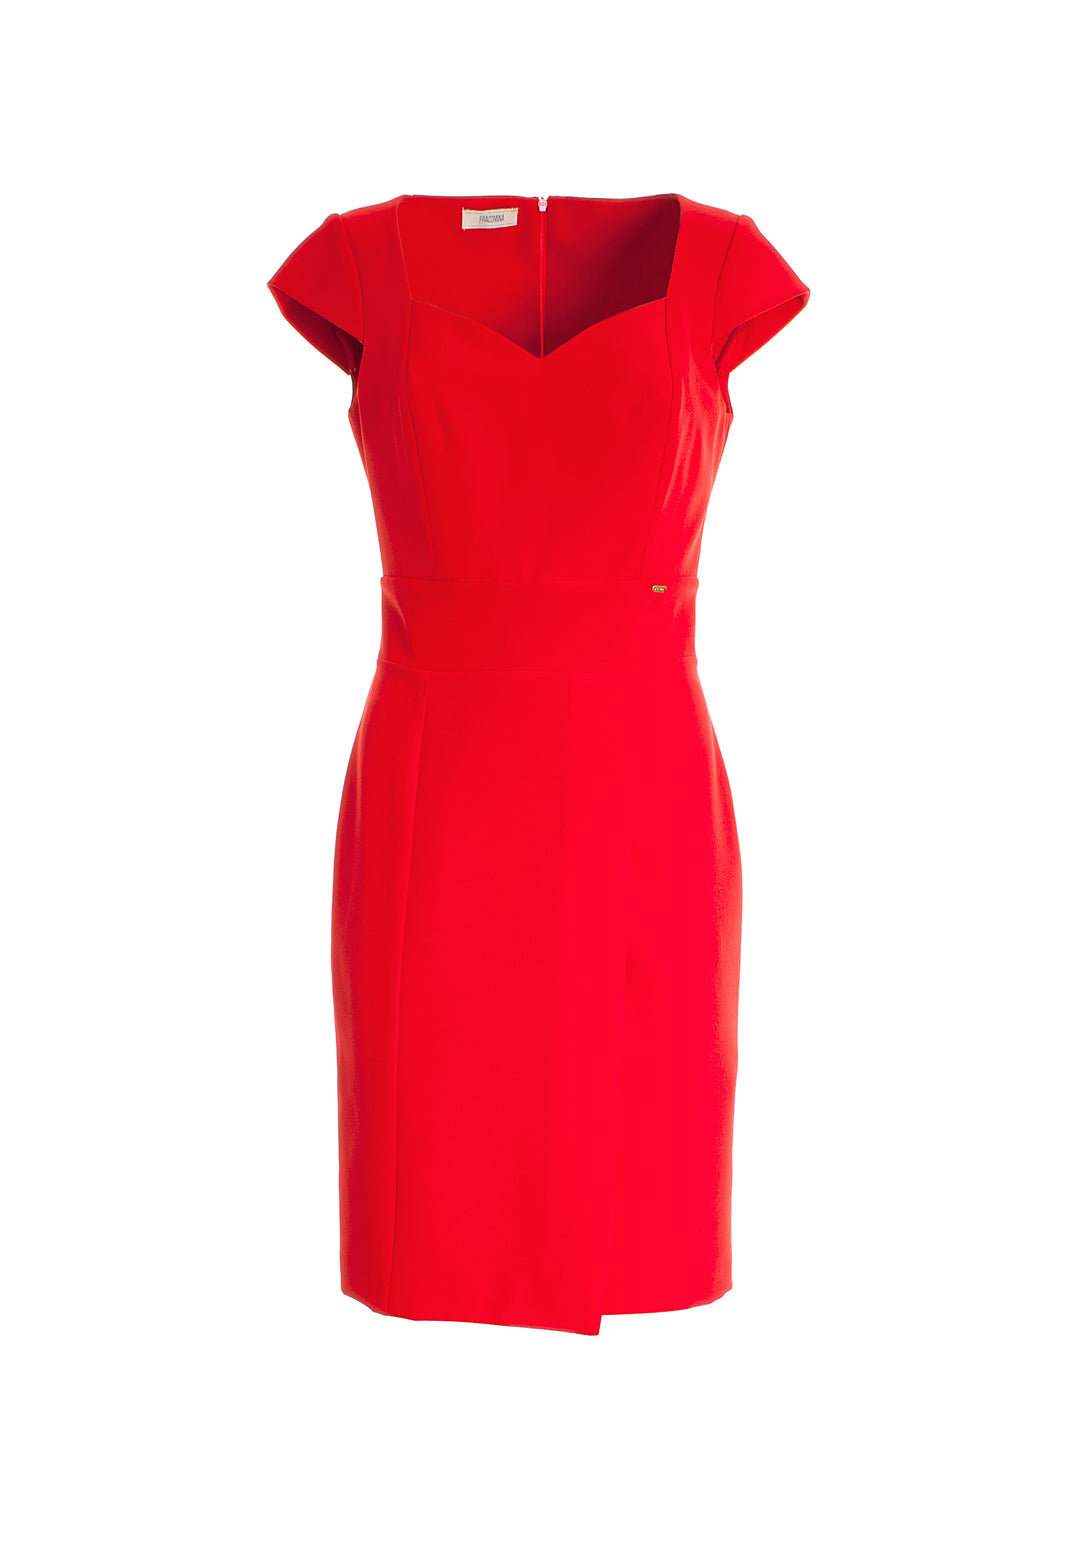 Sheath dress tight fit made in technical fabric